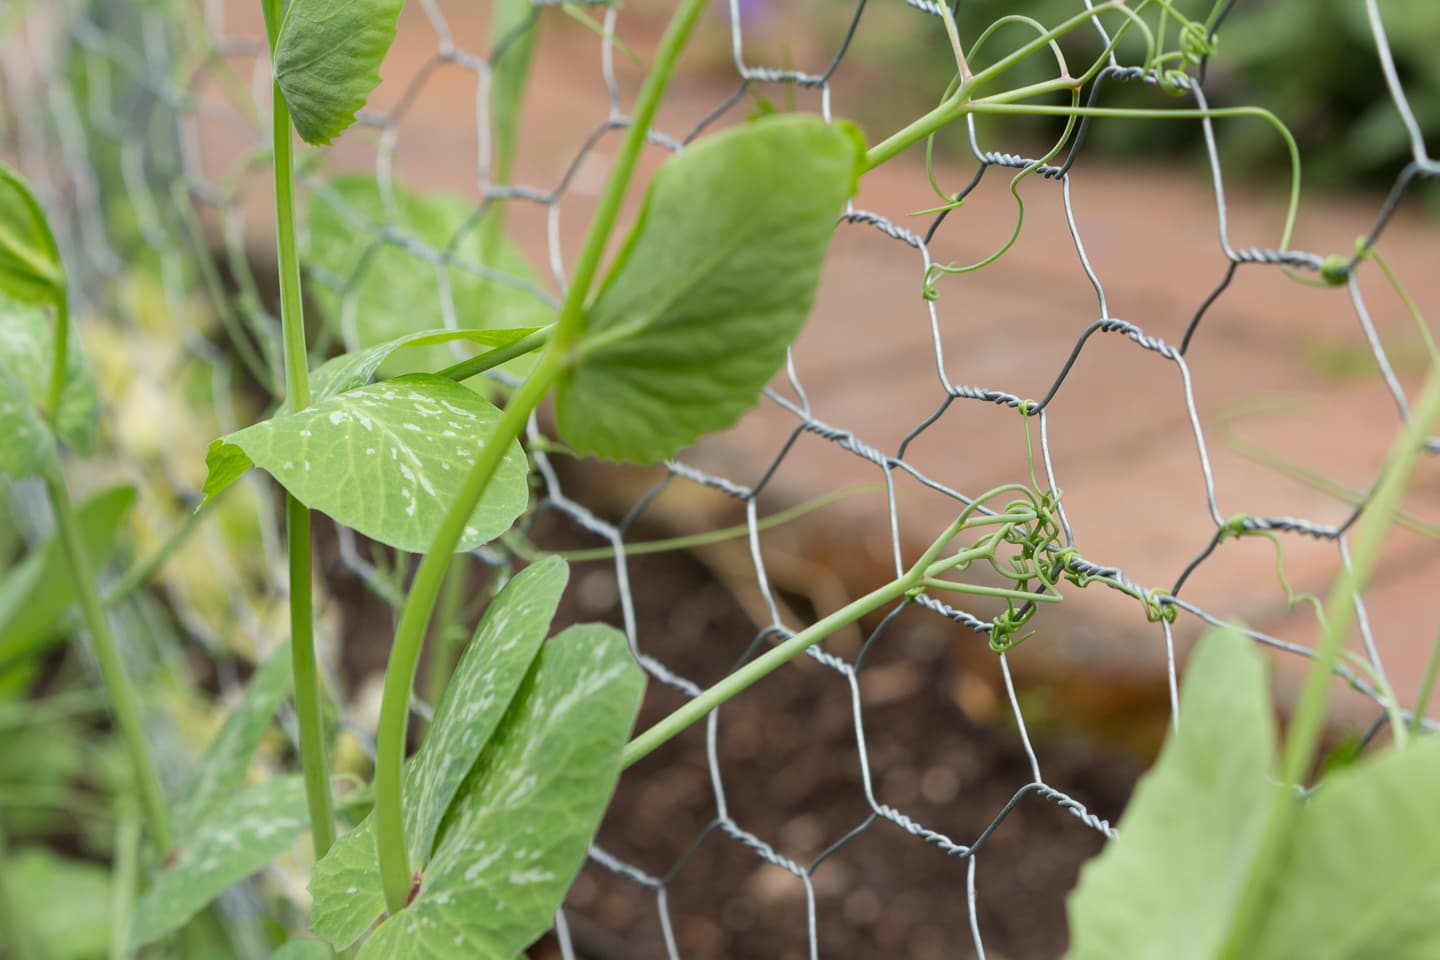 Peas growing with tendrils hanging on to chicken wire fencing